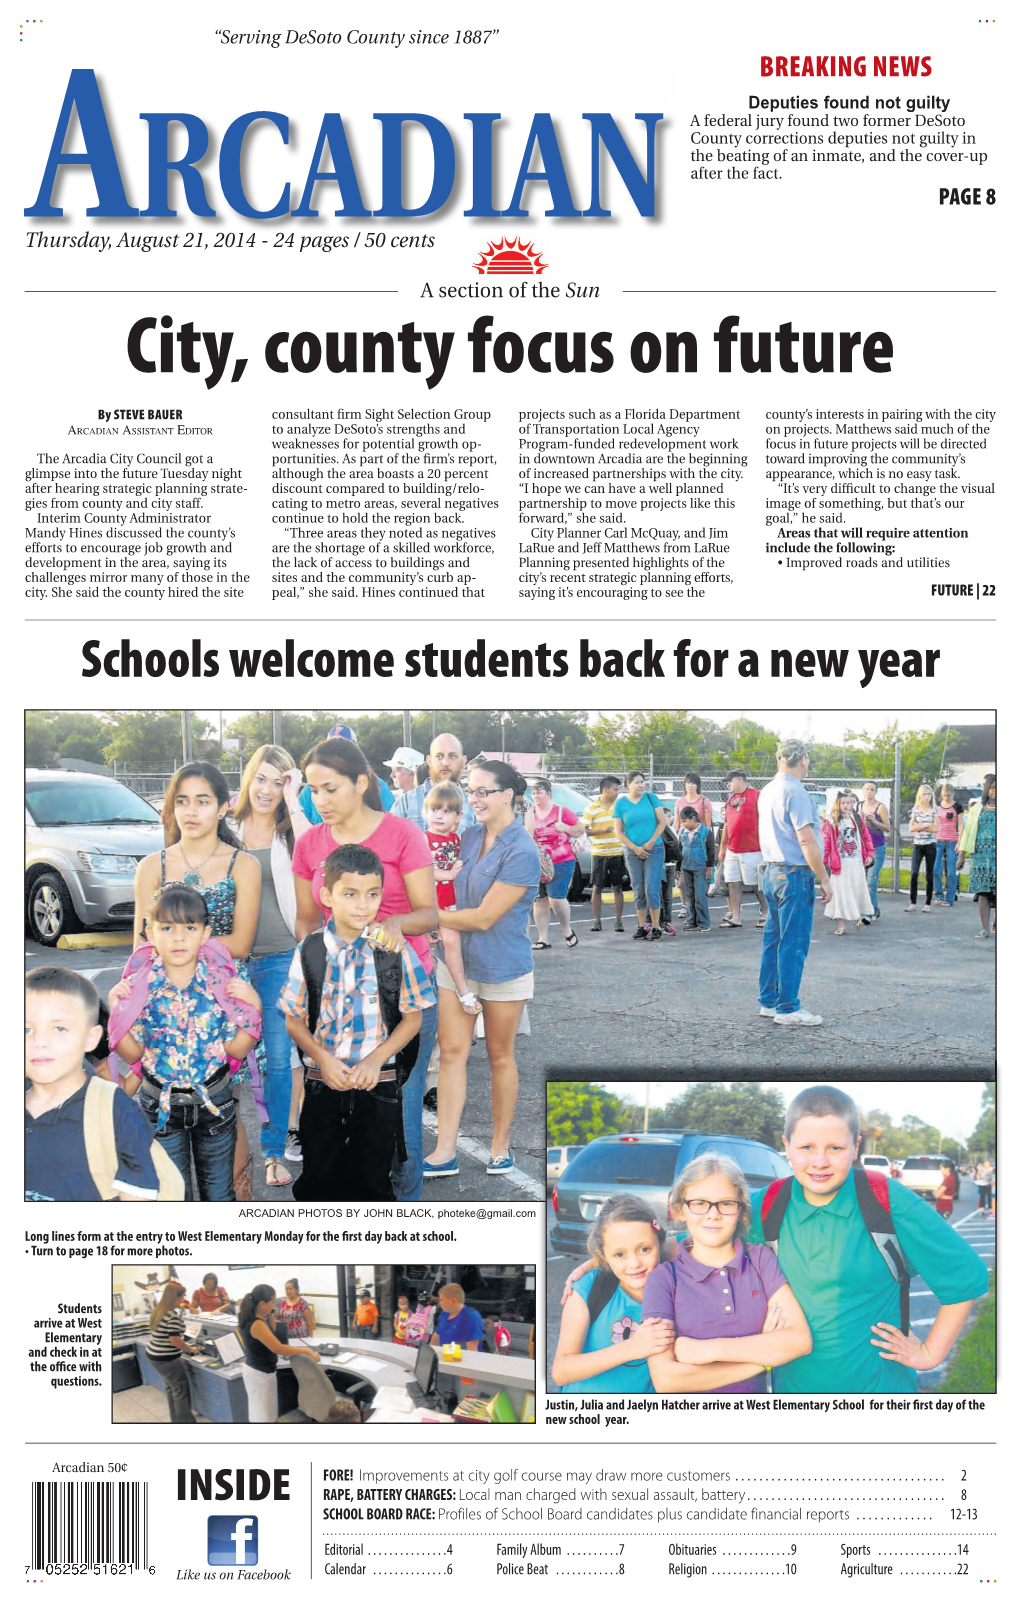 City, County Focus on Future